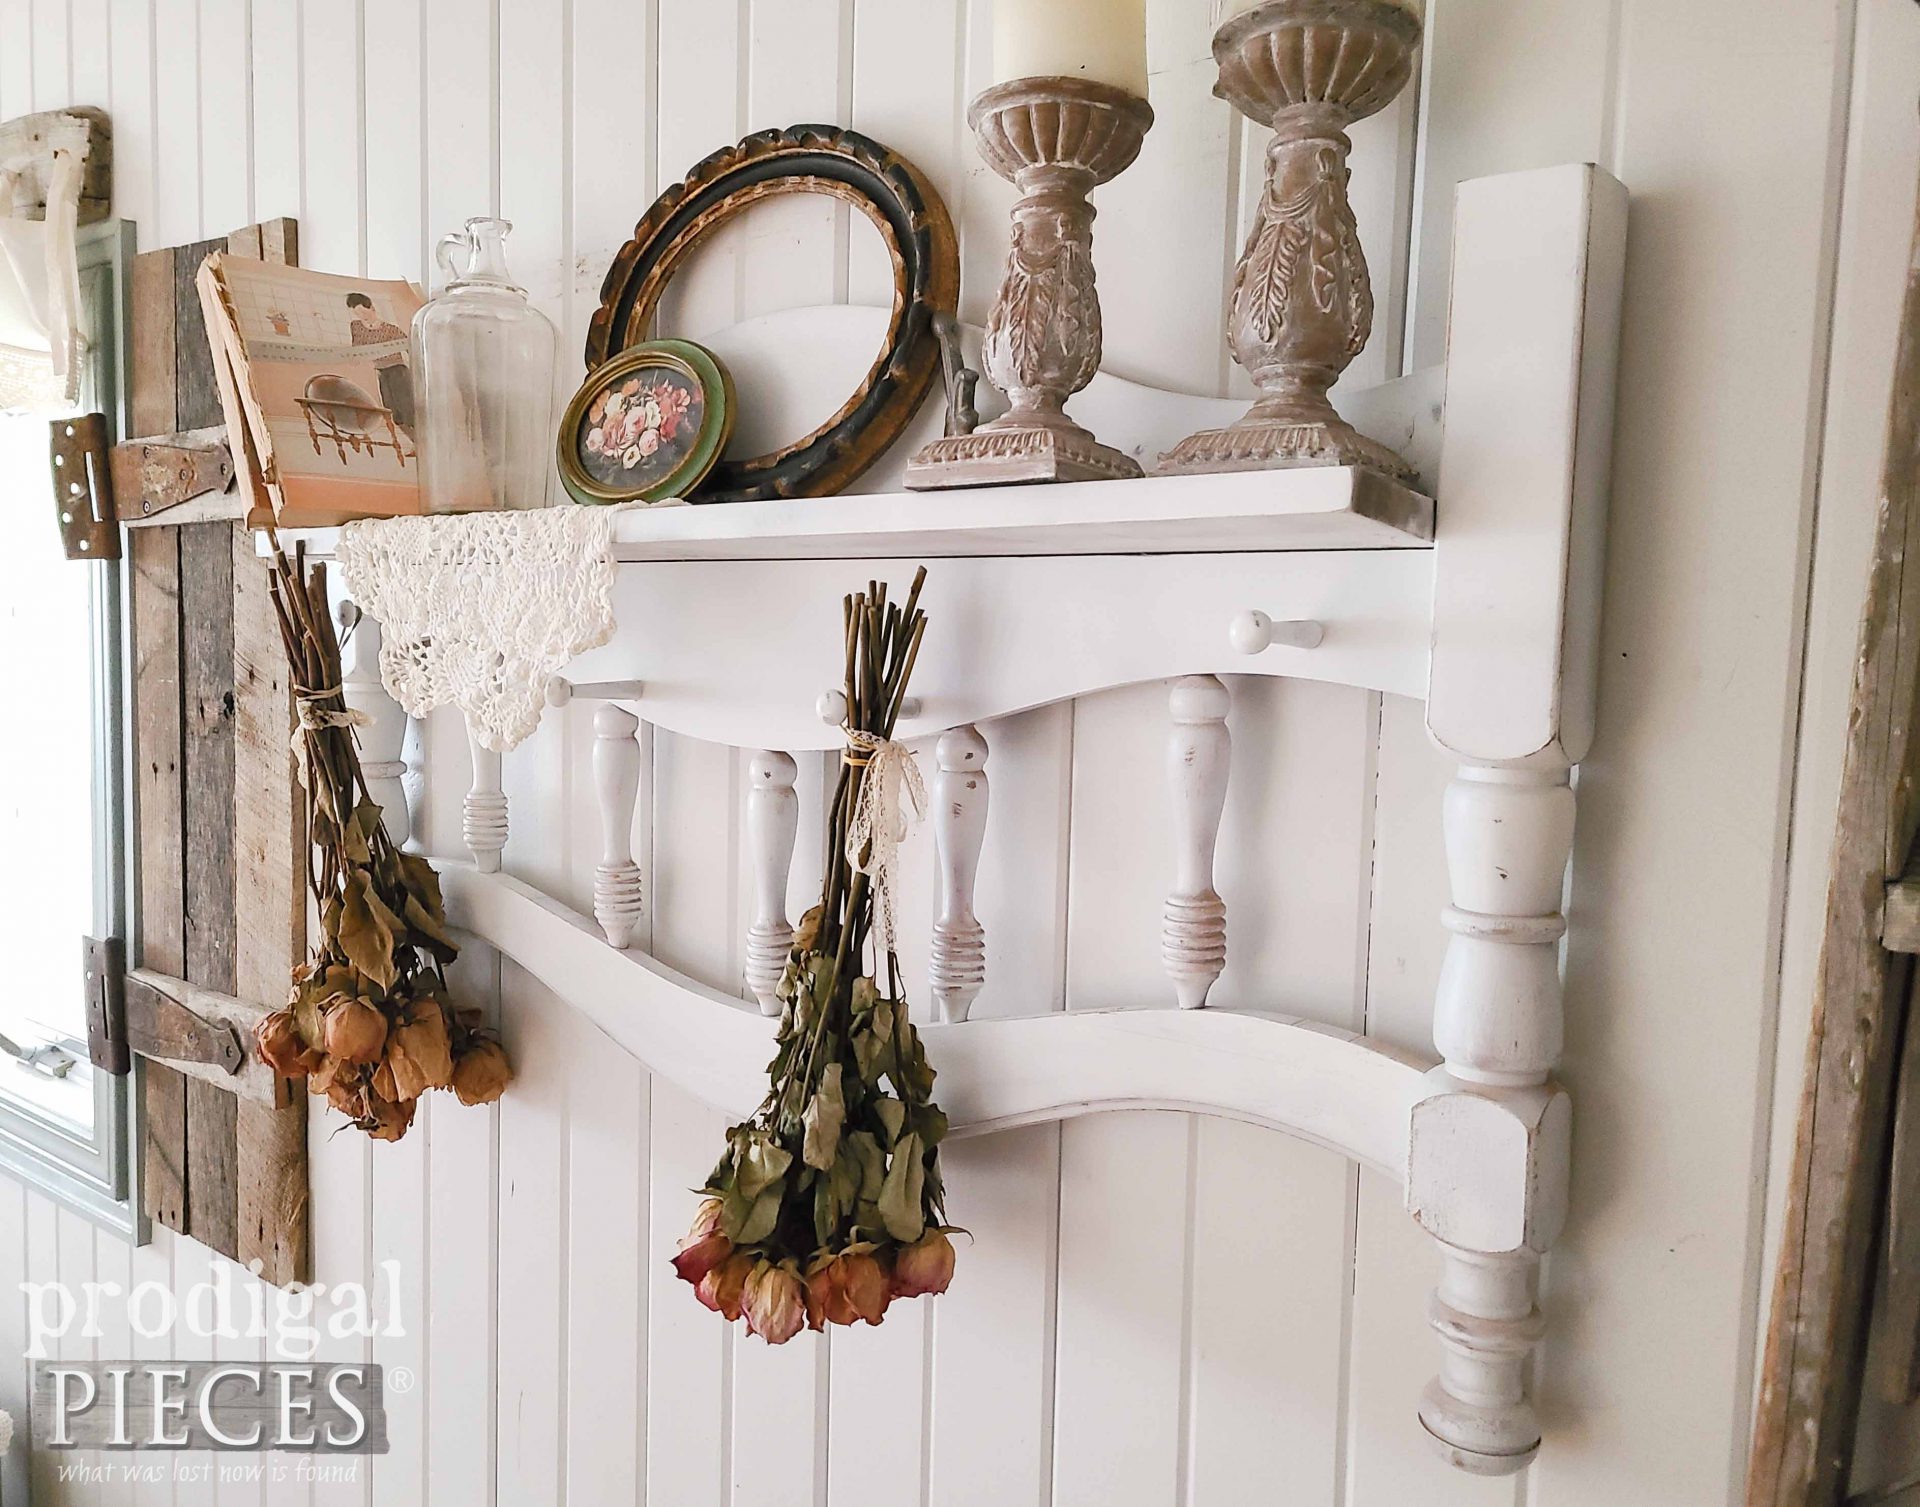 Repurposed Coat Rack Towel Rack from Upcycled Headboard by Larissa of Prodigal Pieces | prodigalpieces.com #prodigalpieces #repurposed #upcycled #furniture #home #diy